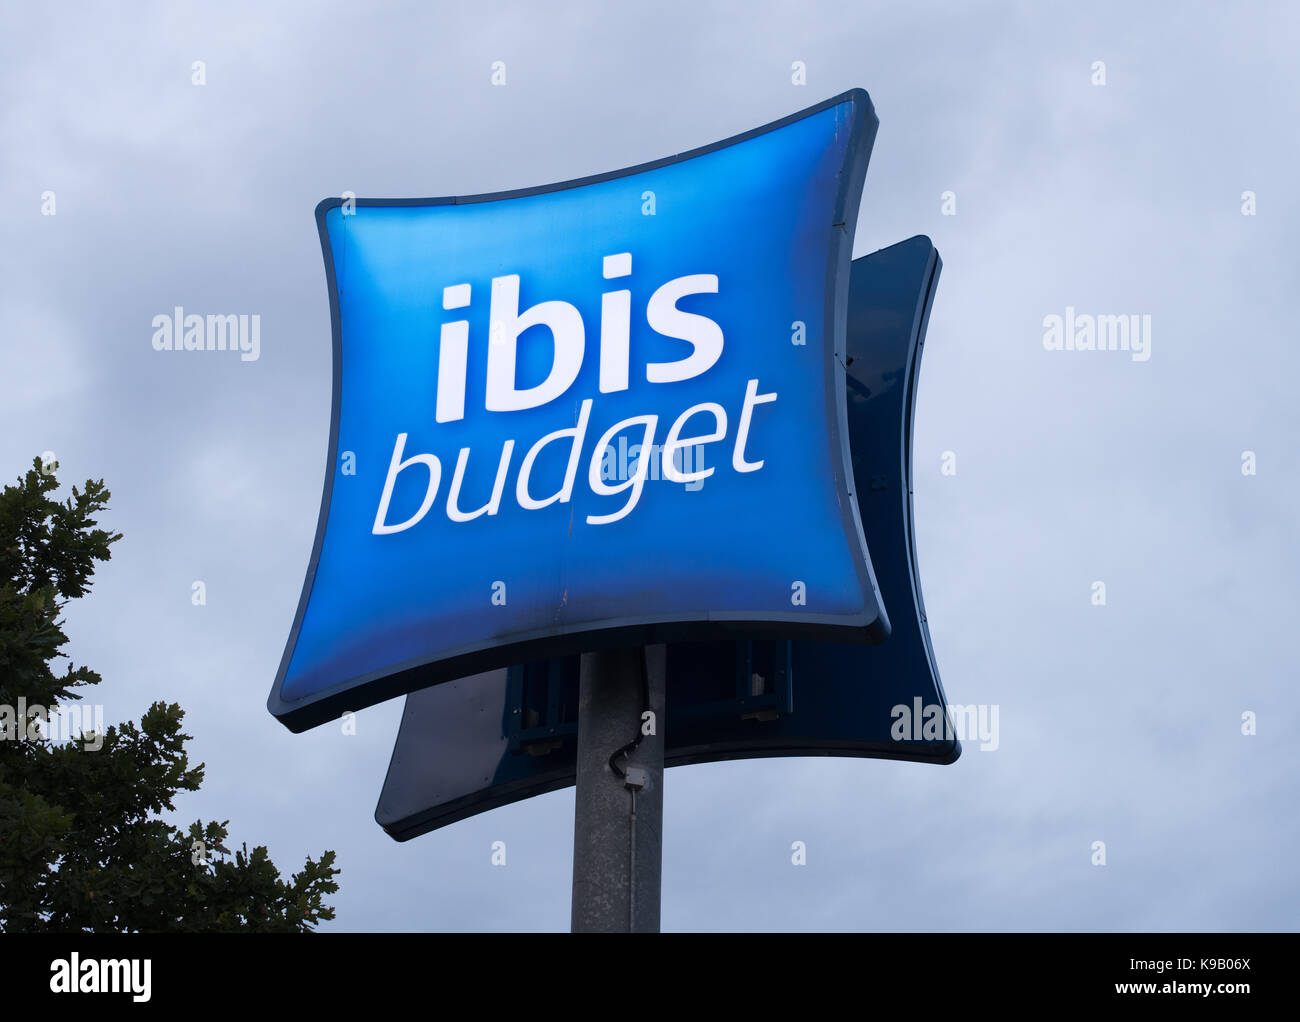 ibis budget hotel sign, Germany, Europe. Stock Photo